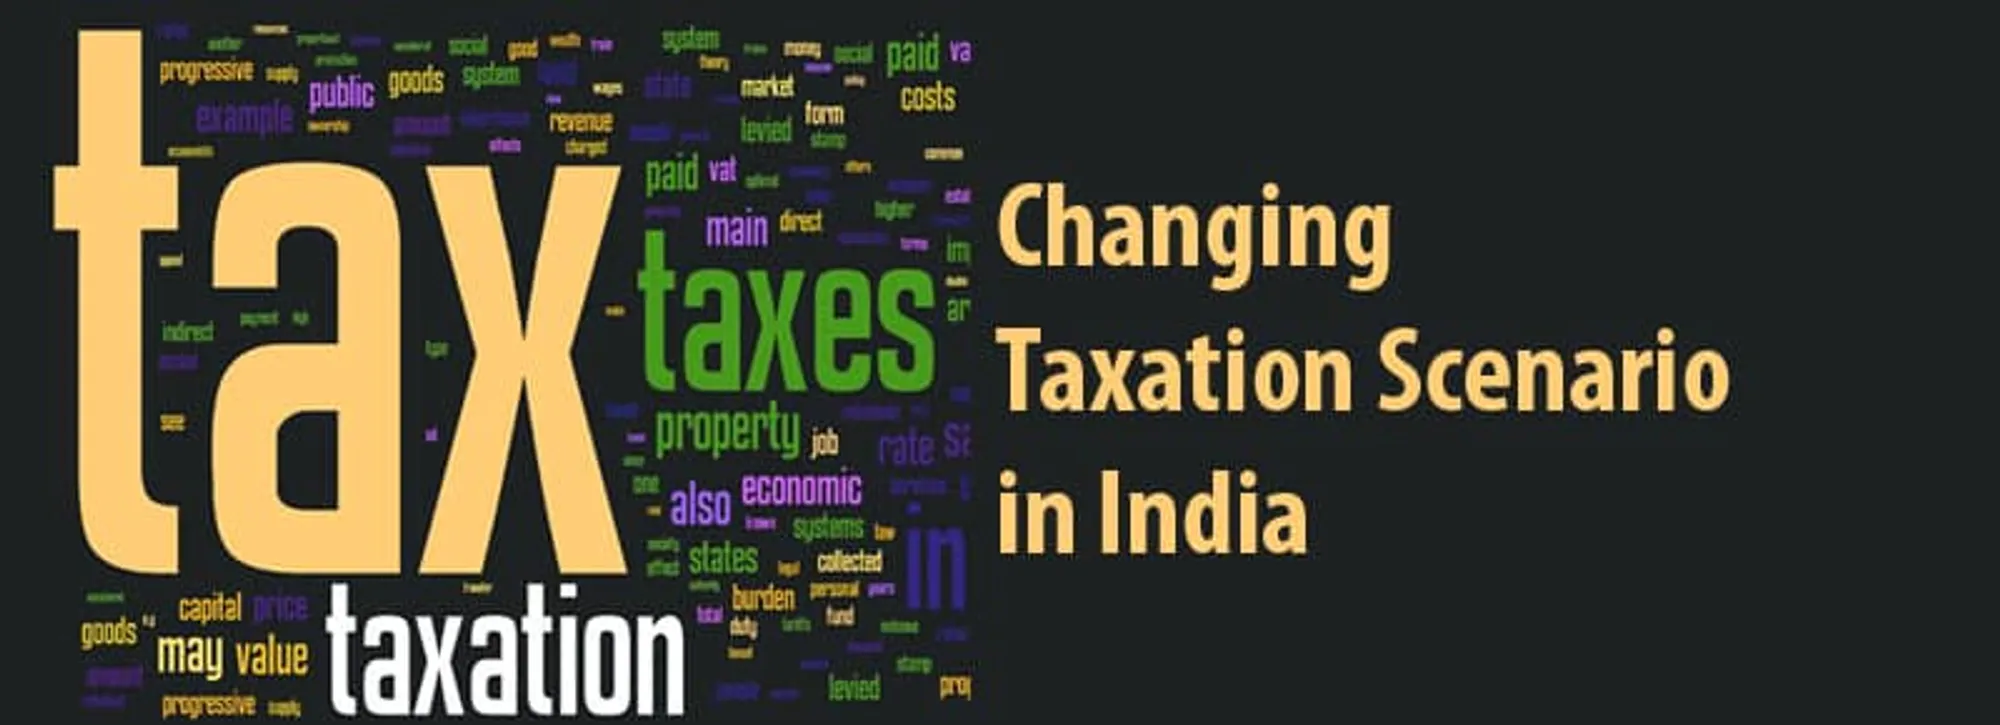 changing-taxation-scenario-in-india